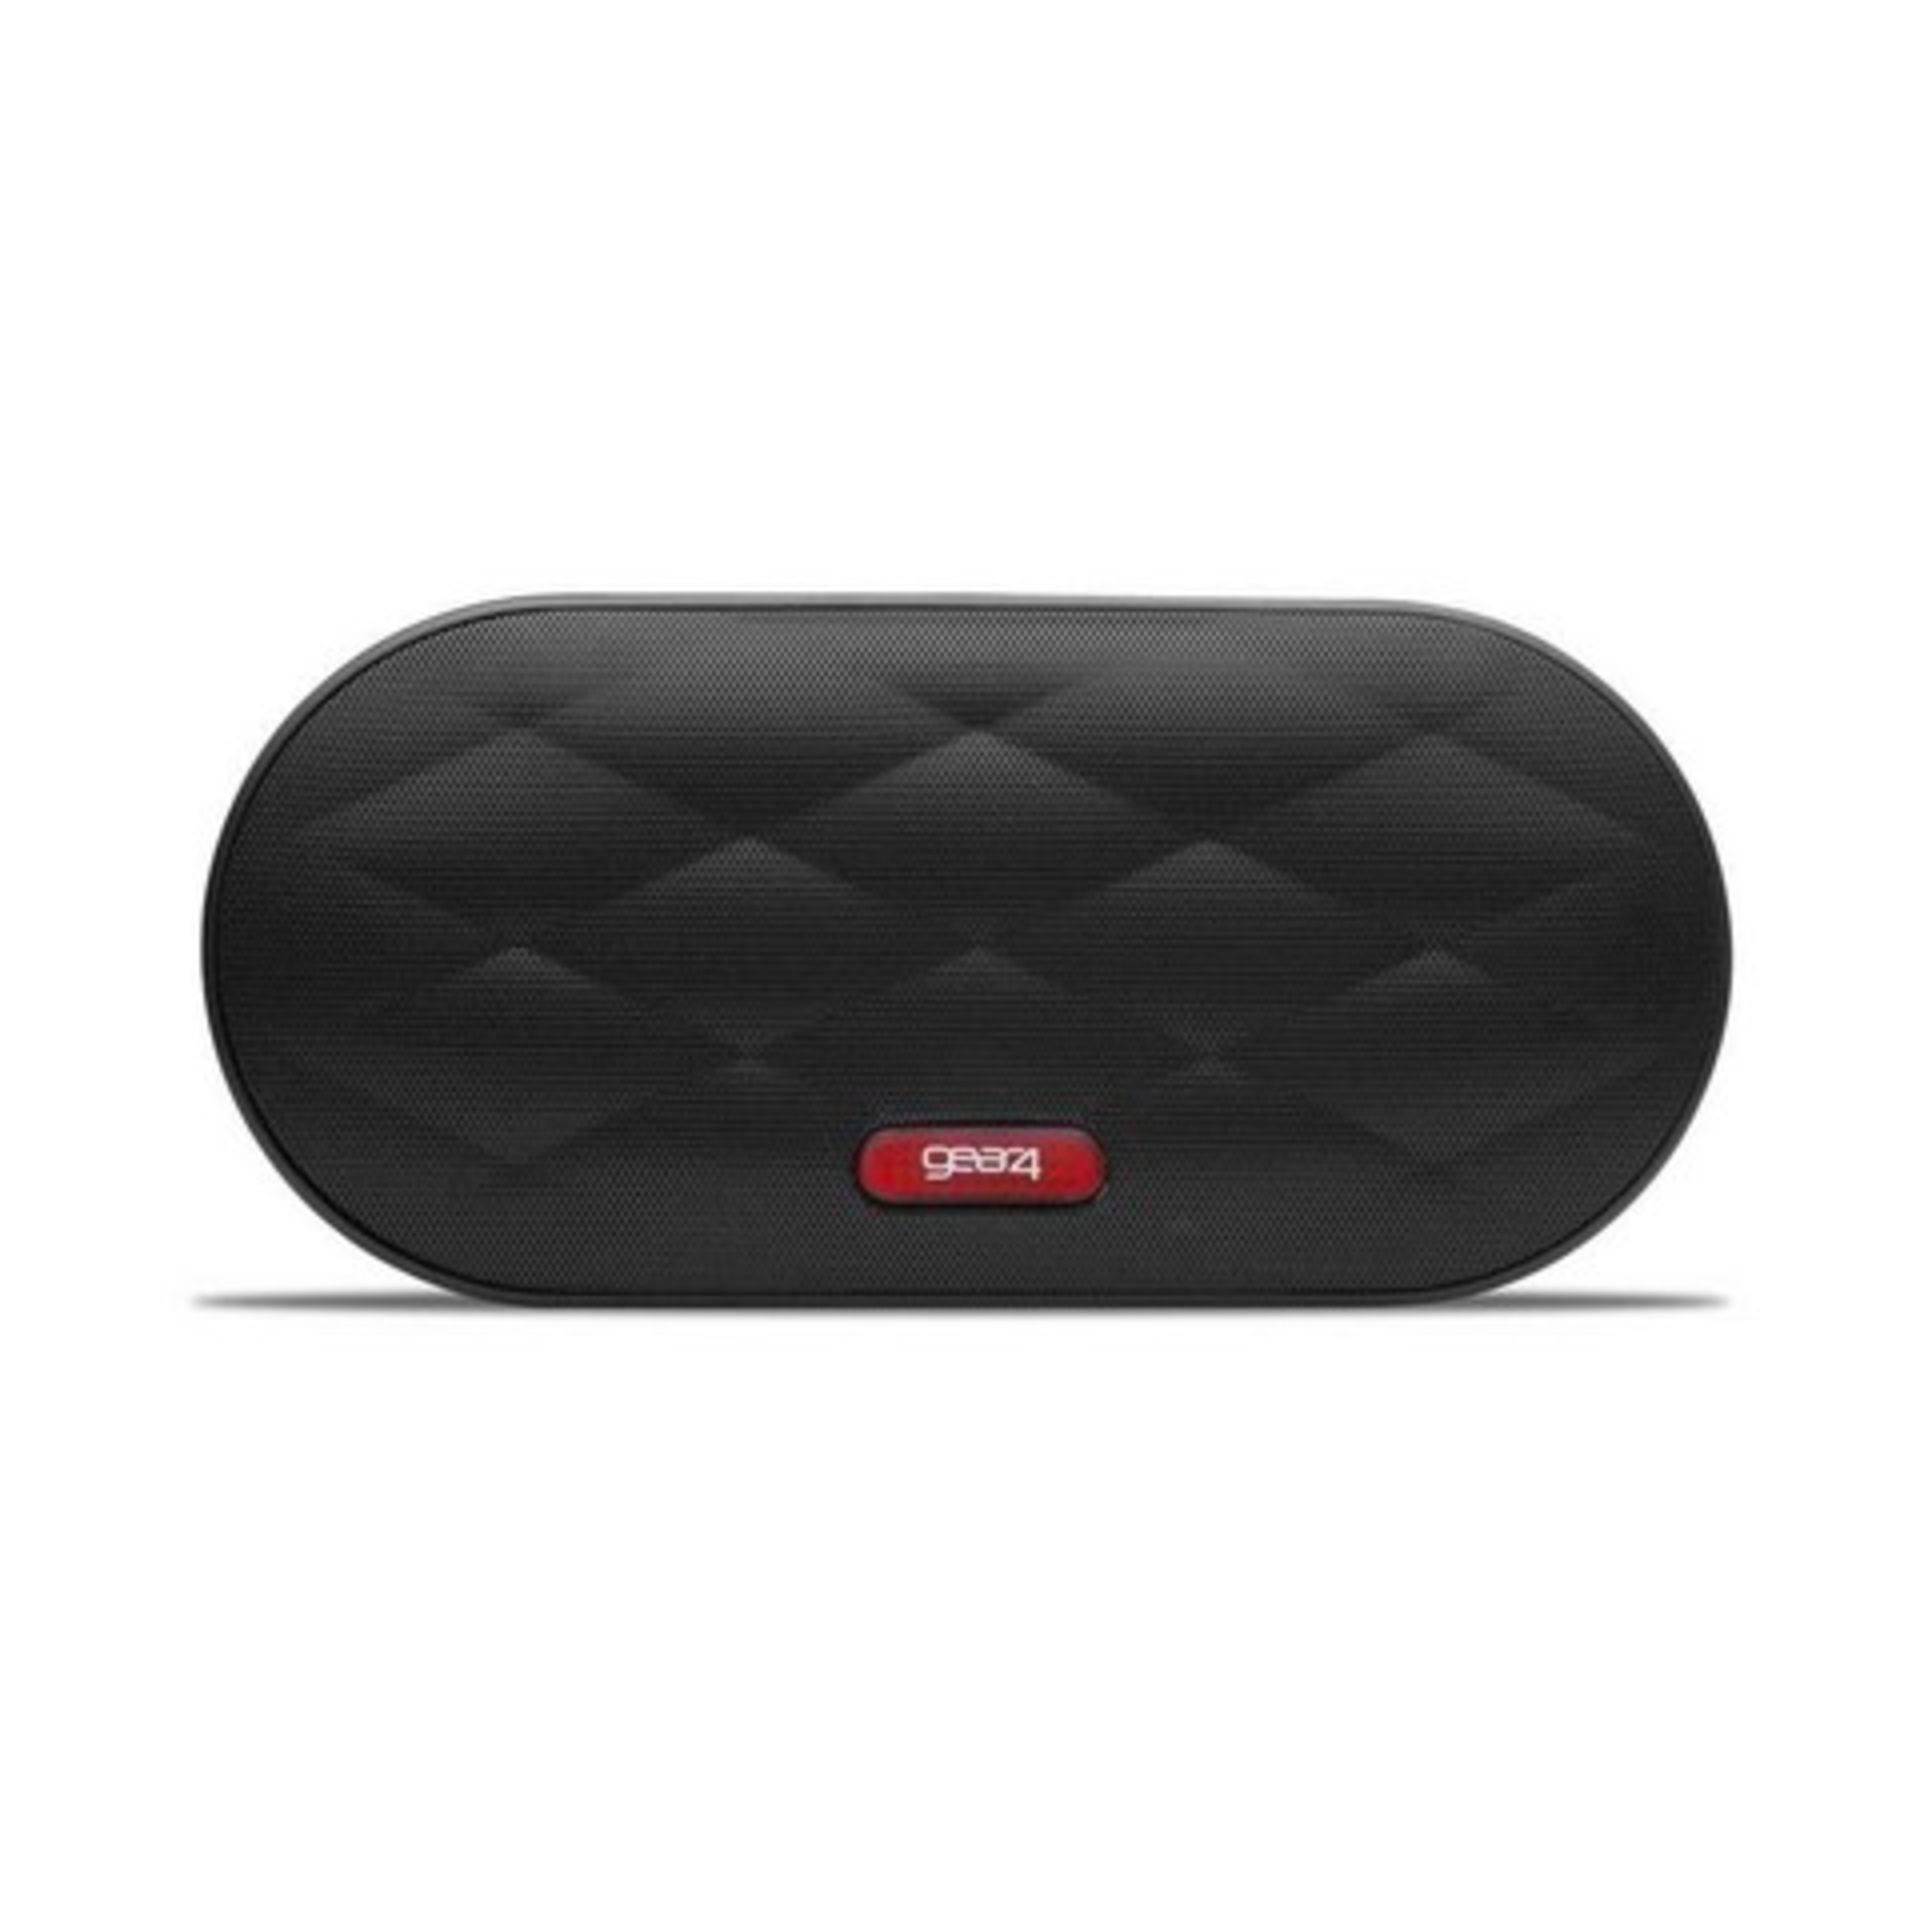 V Brand New Gear4 XOME Stereo Bluetooth Speaker - RRP £79.99 - Stream Music From Bluetooth Devices